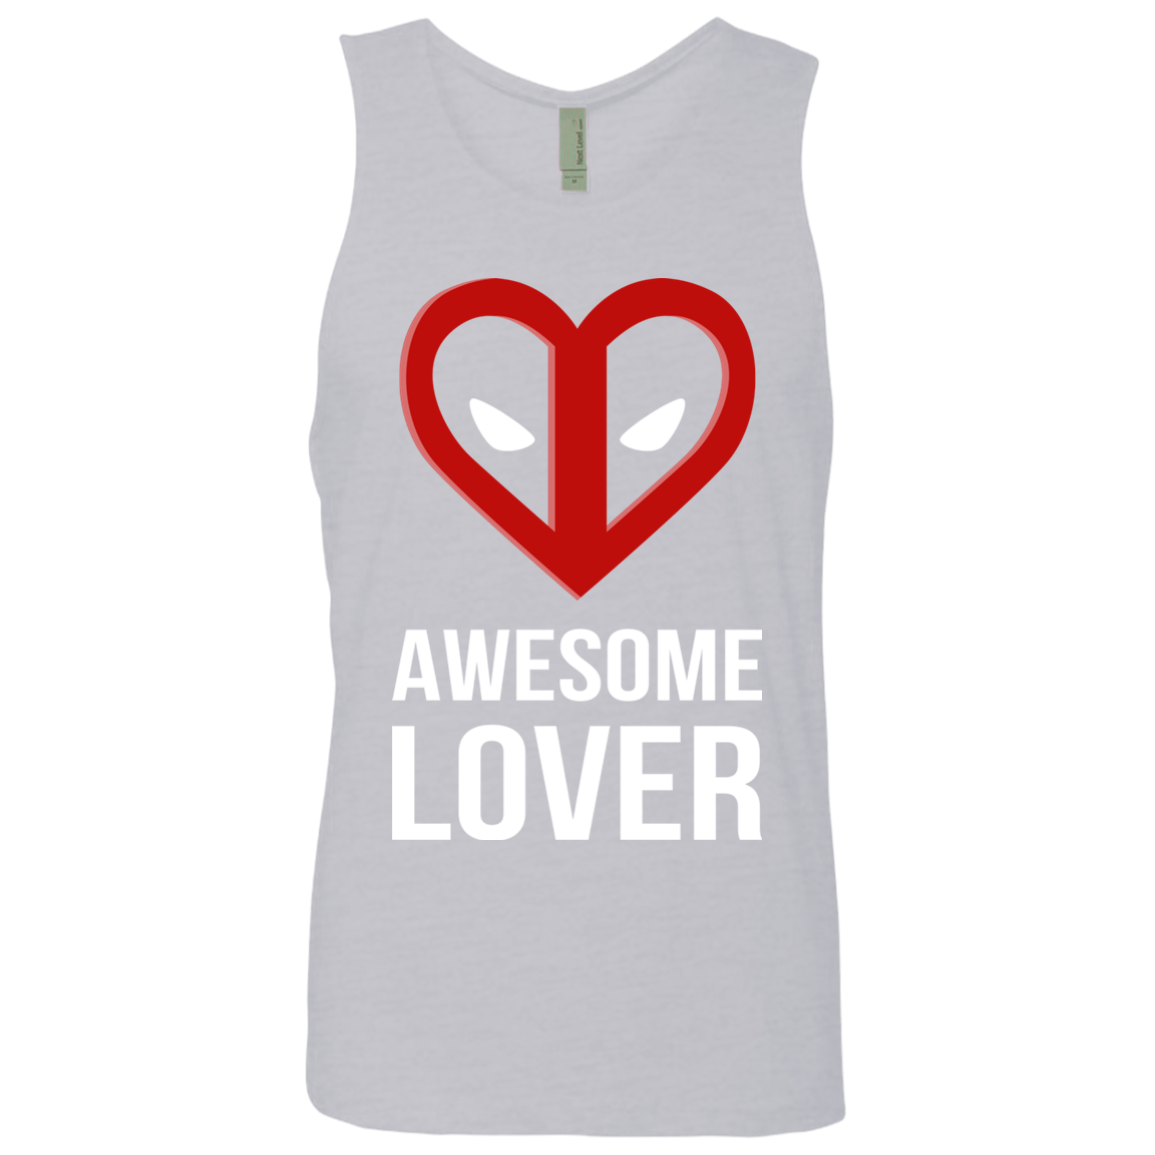 Awesome lover Men's Premium Tank Top